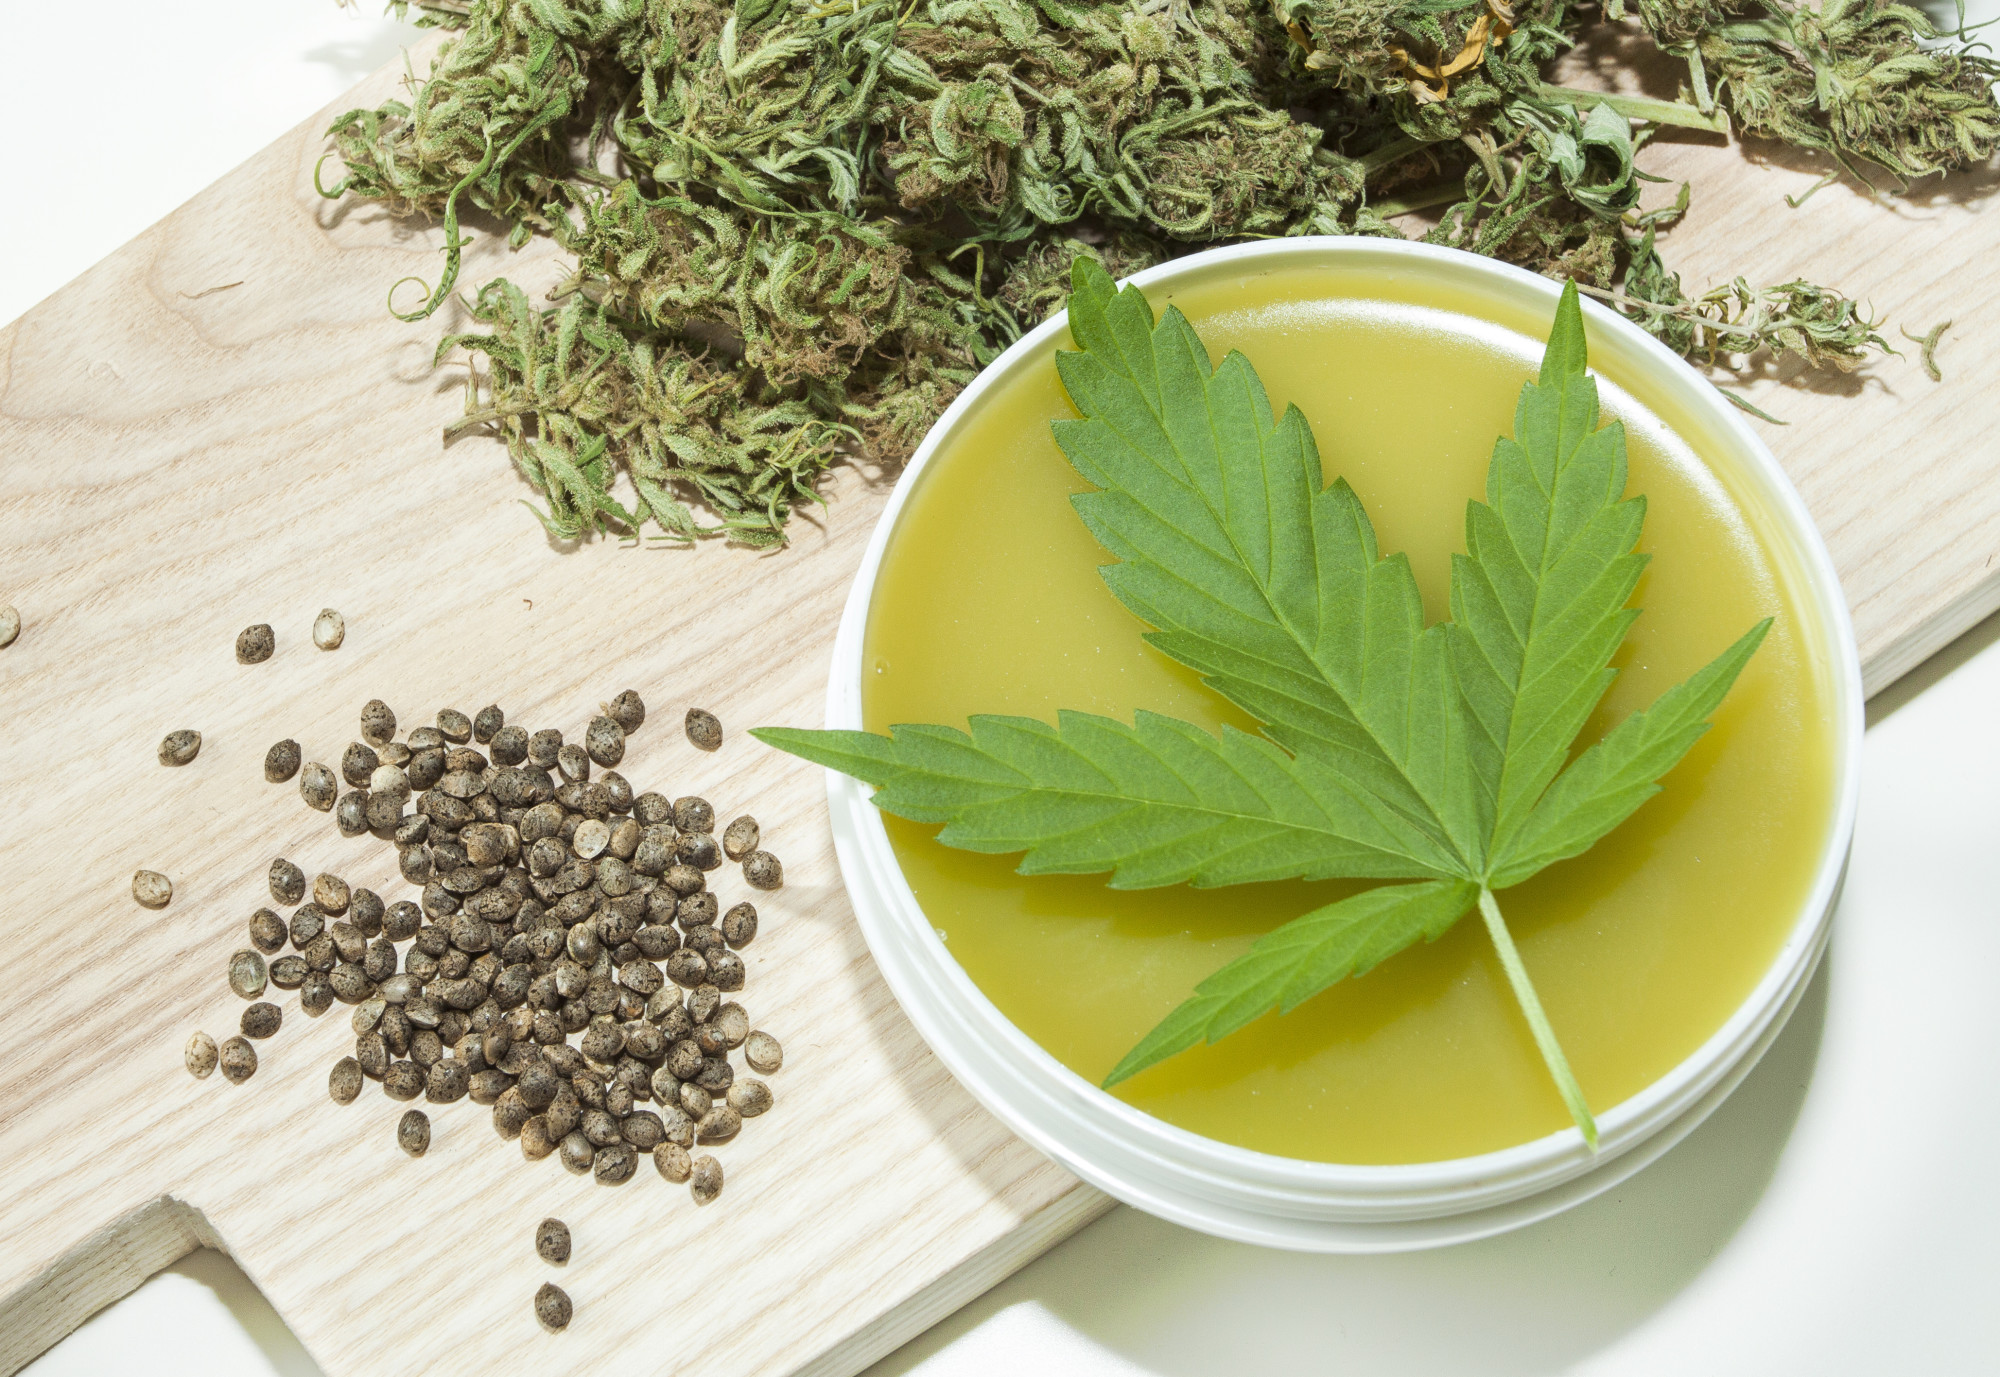 TIPS TO FIND THE BEST CBD SALVE